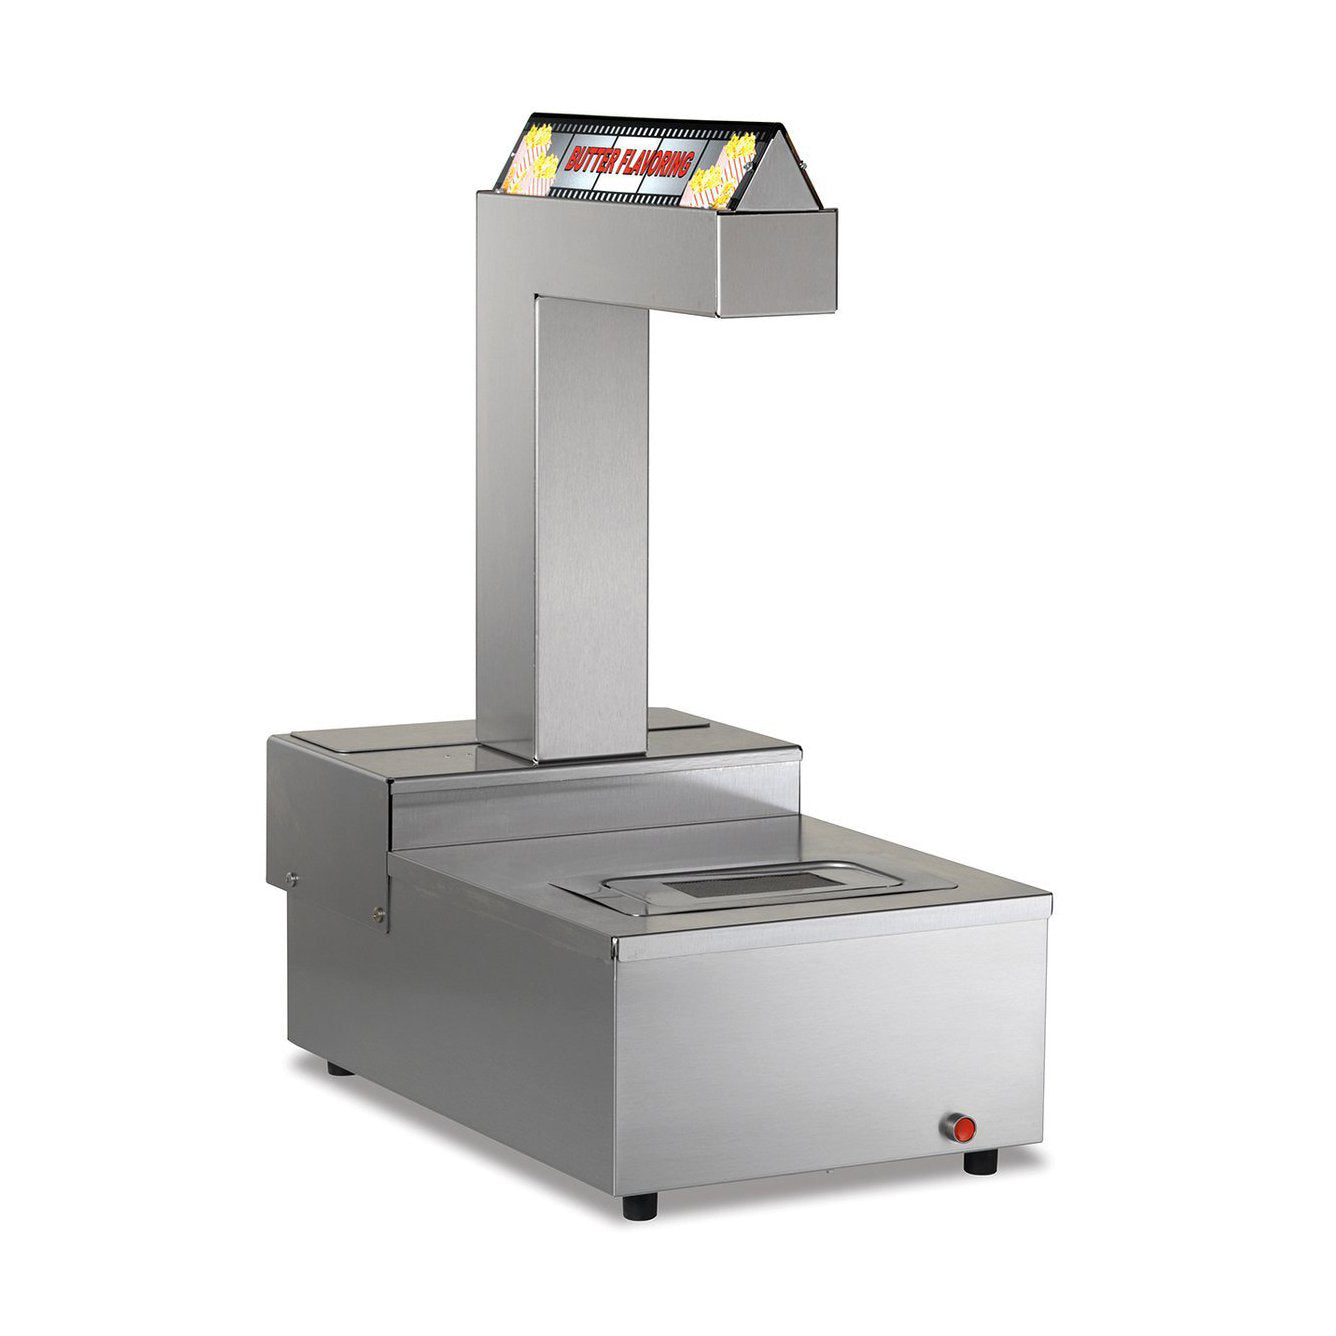 Automatic Counter Topping Dispenser